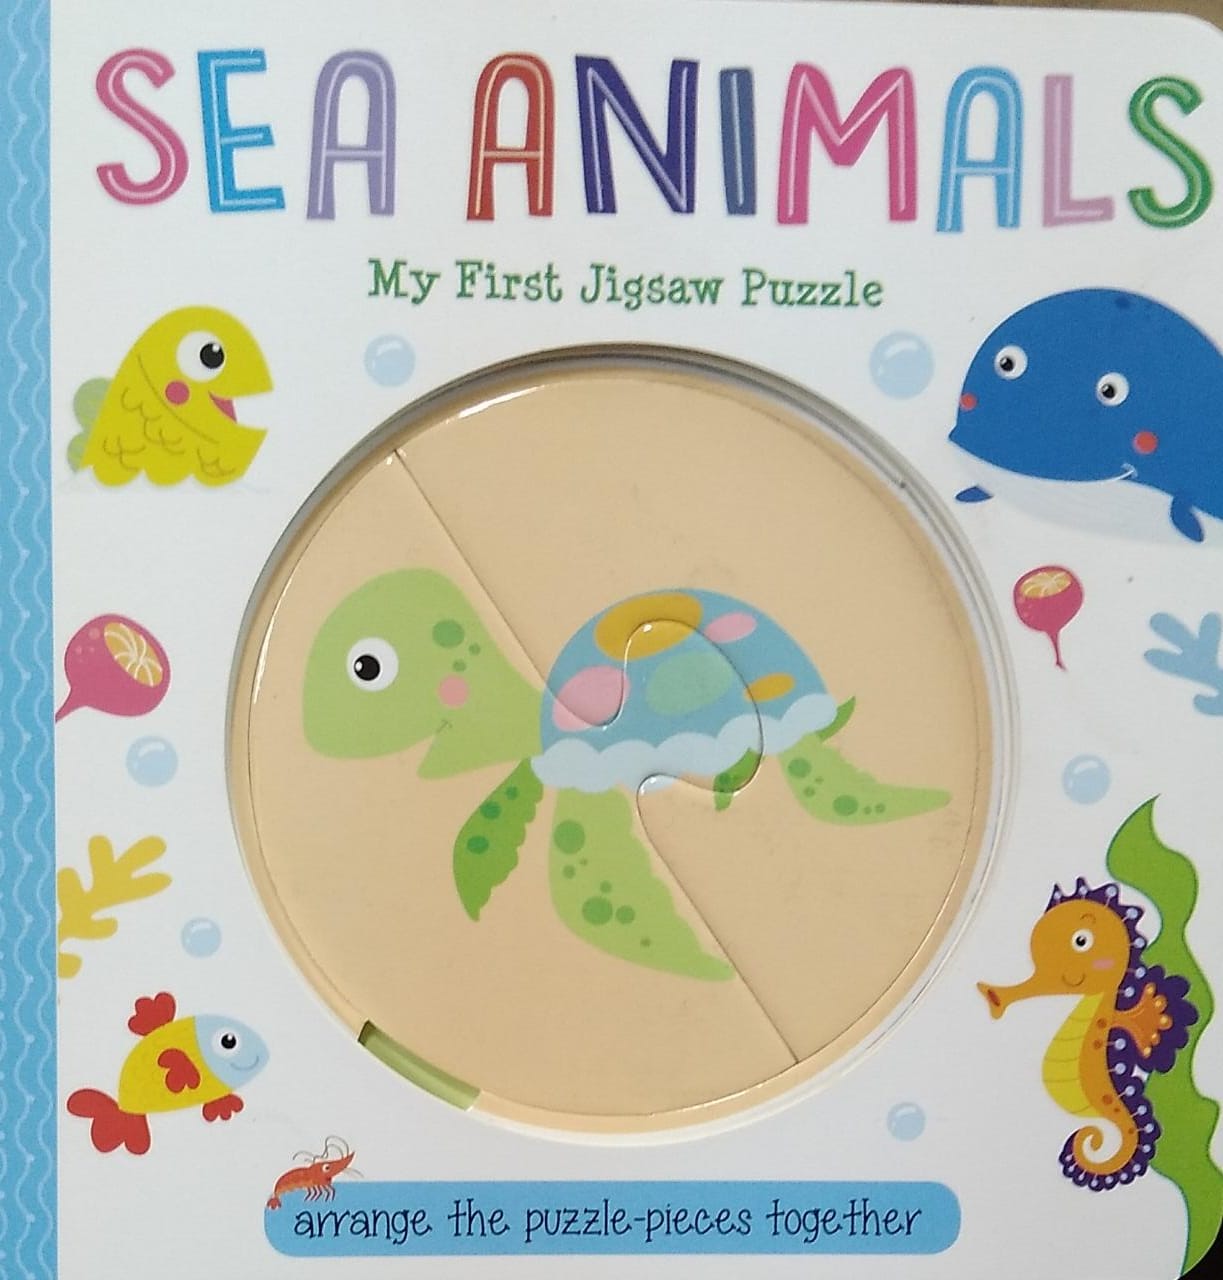 Sea Animals - My First Jigsaw Puzzle